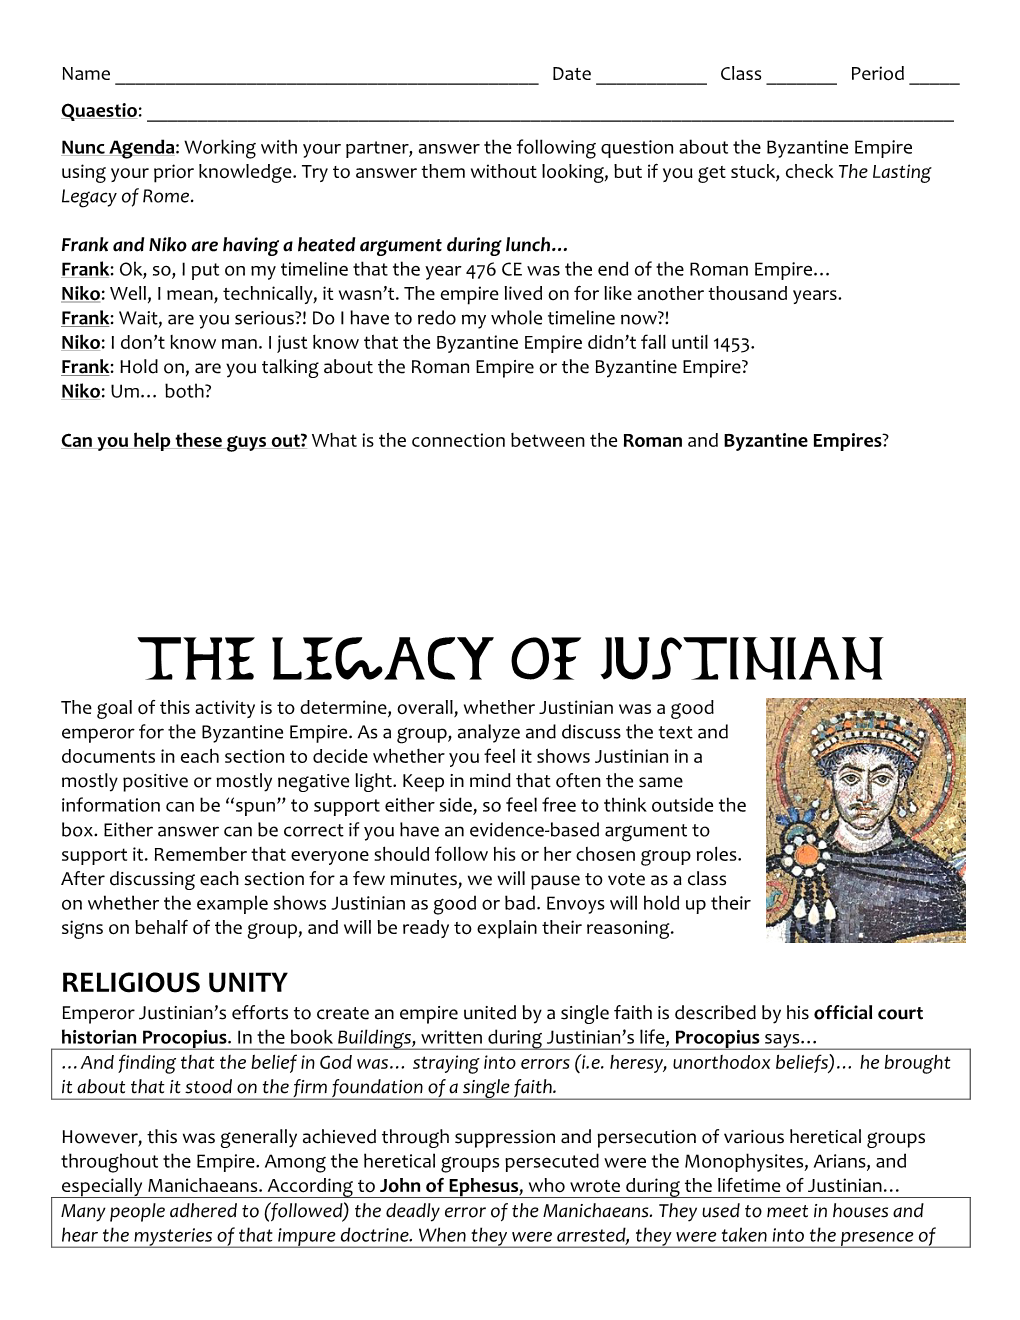 The Legacy of Justinian the Goal of This Activity Is to Determine, Overall, Whether Justinian Was a Good Emperor for the Byzantine Empire